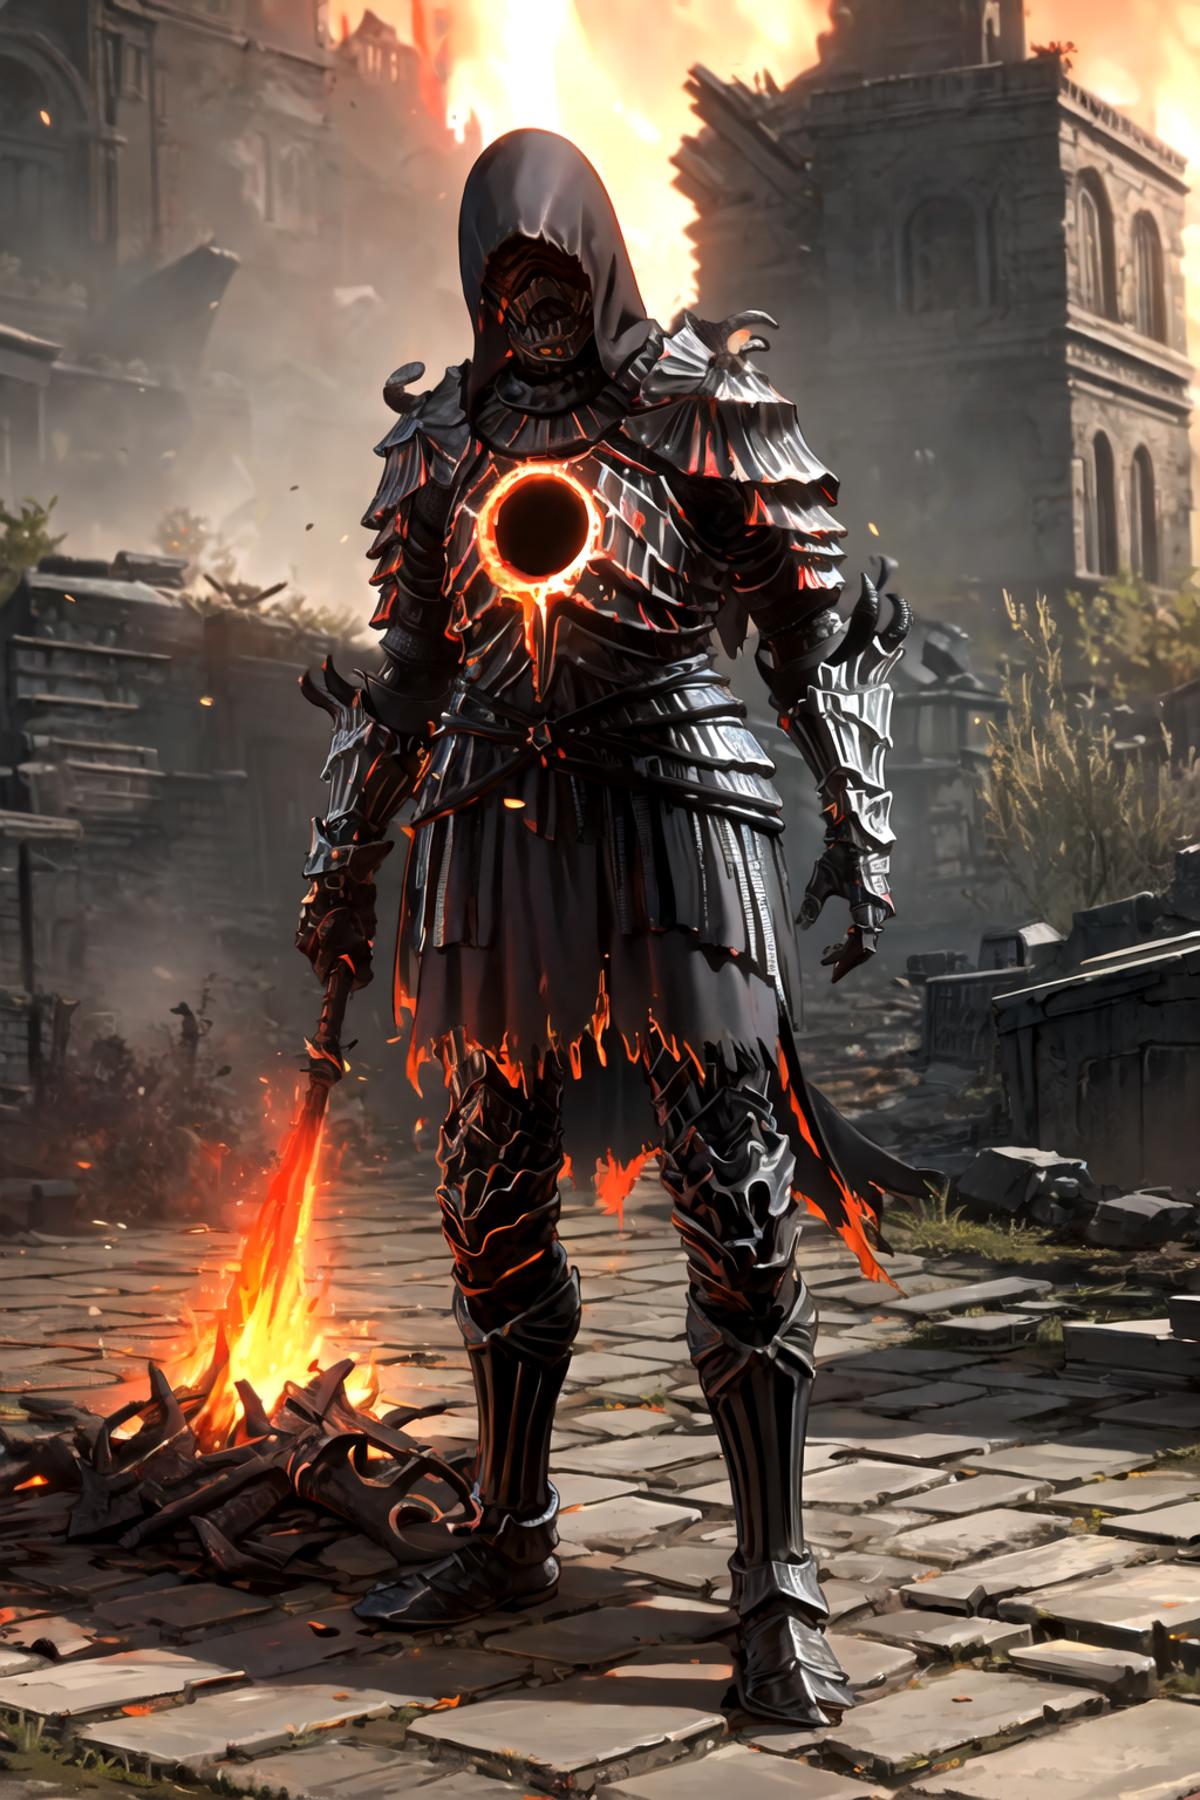 Ringed Knight | Dark Souls 3 image by Finore